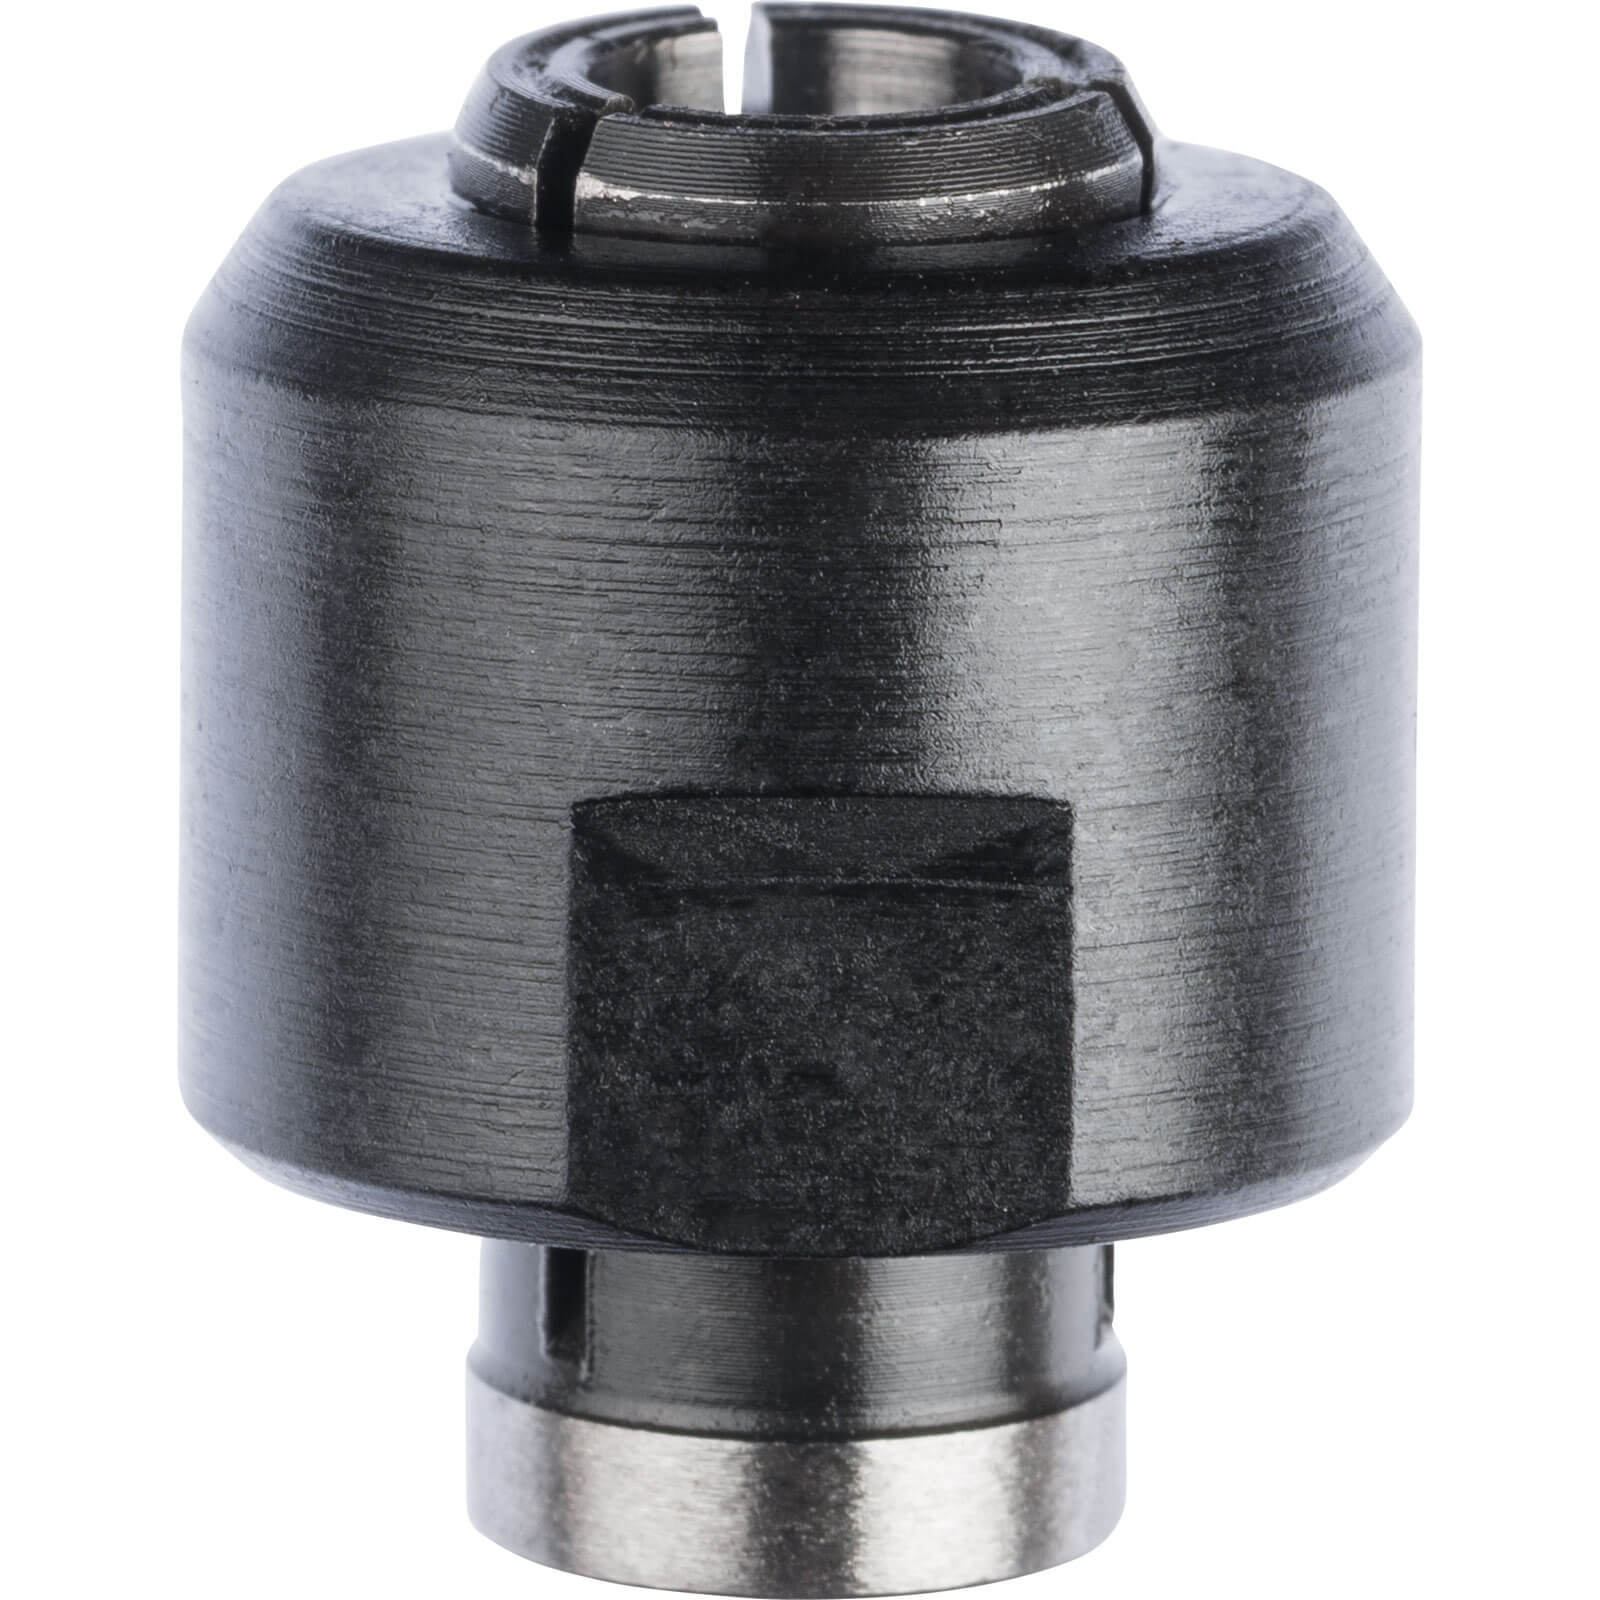 Photo of Bosch Ggs 7- 27 - 1212 Collet 8mm